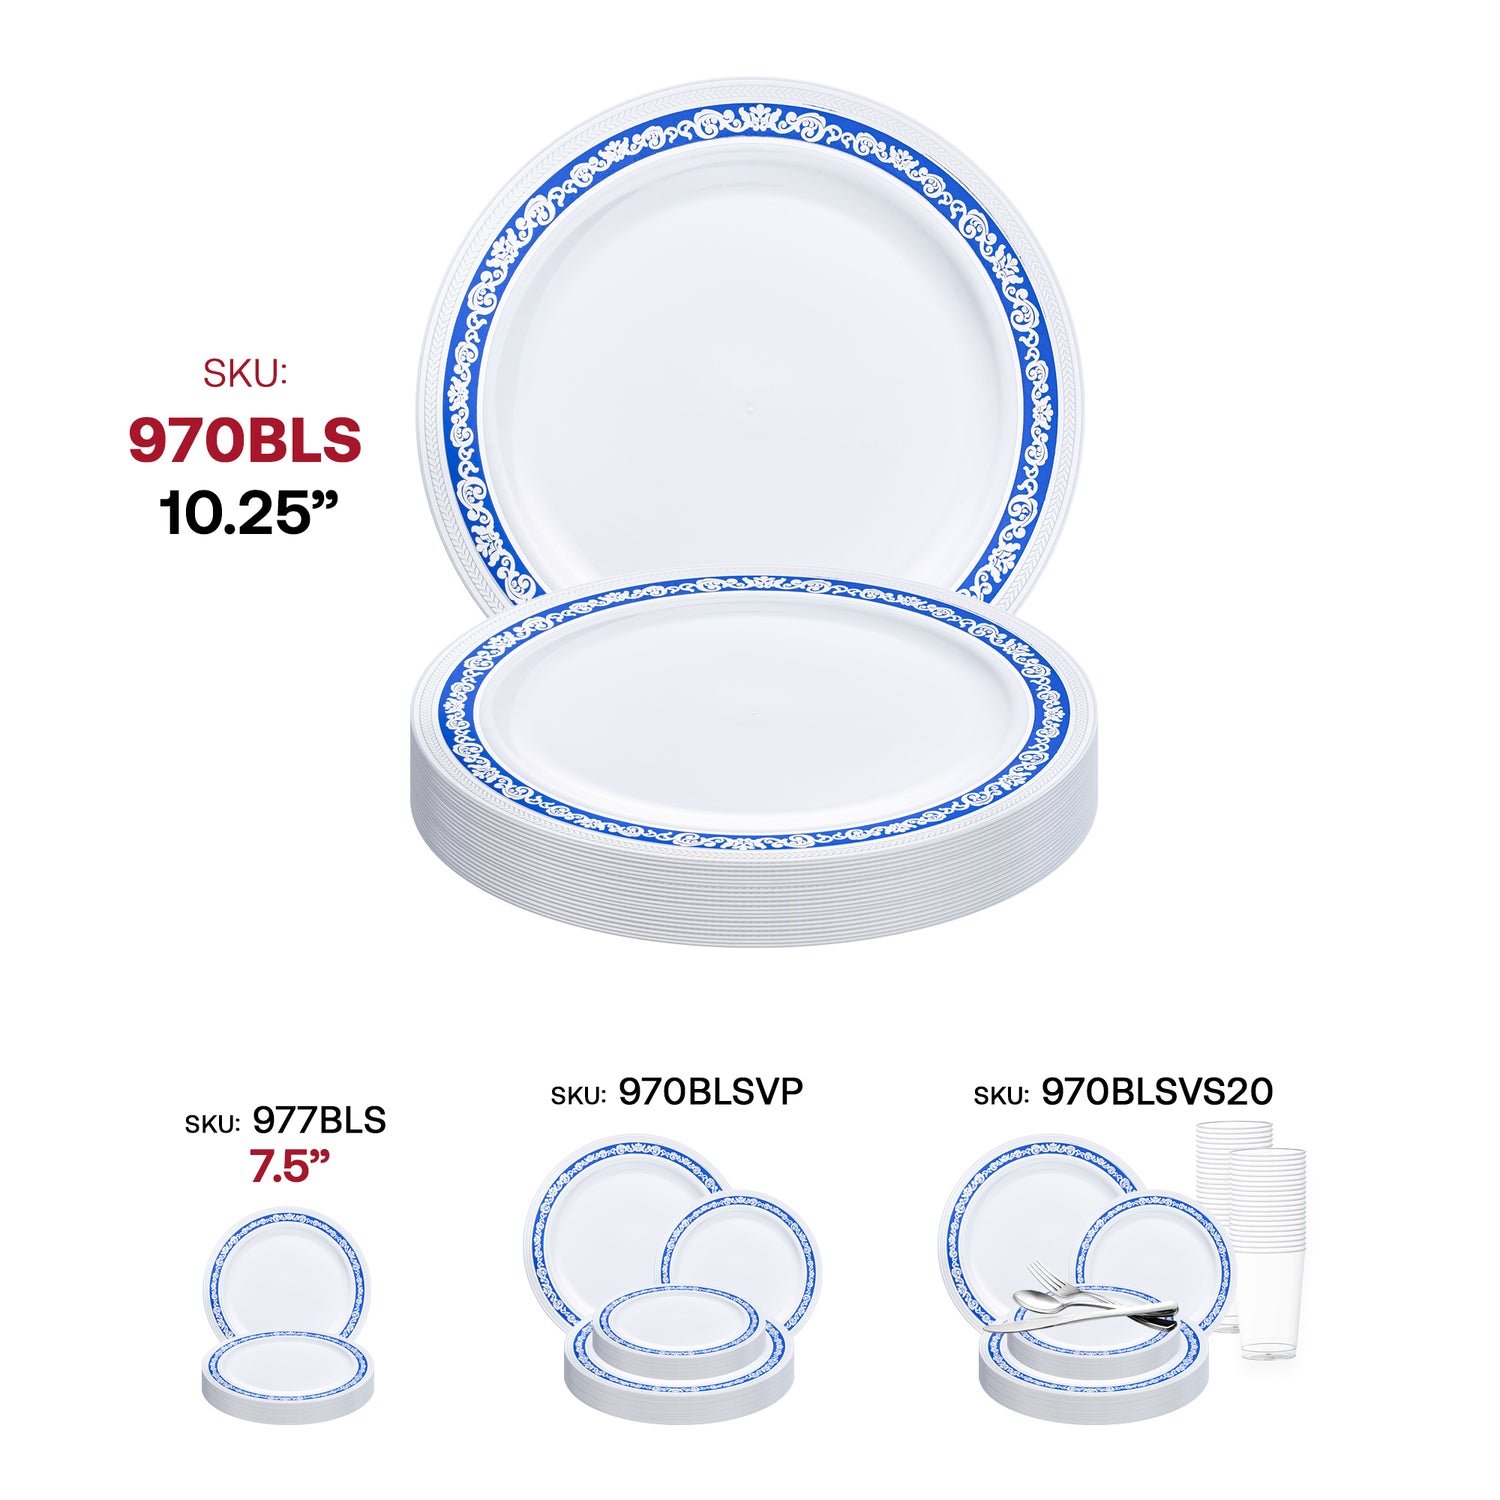 White with Blue and Silver Royal Rim Plastic Dinner Plates (10.25") SKU | The Kaya Collection